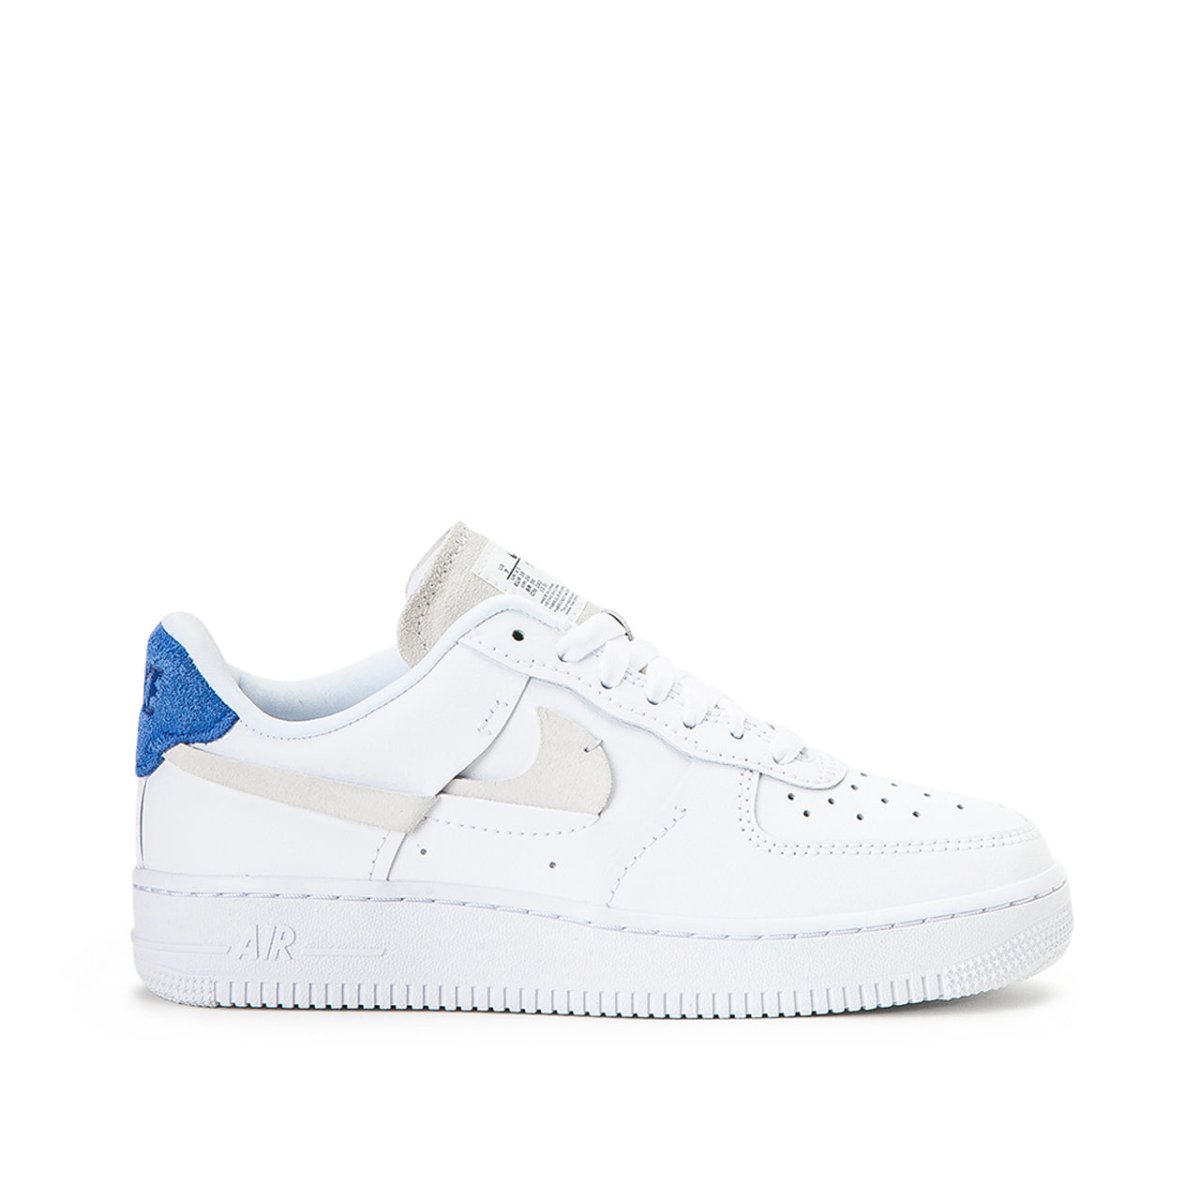 Nike WMNS Air Force 1 '07 Lux 'Inside Out' (Weiß)  - Allike Store